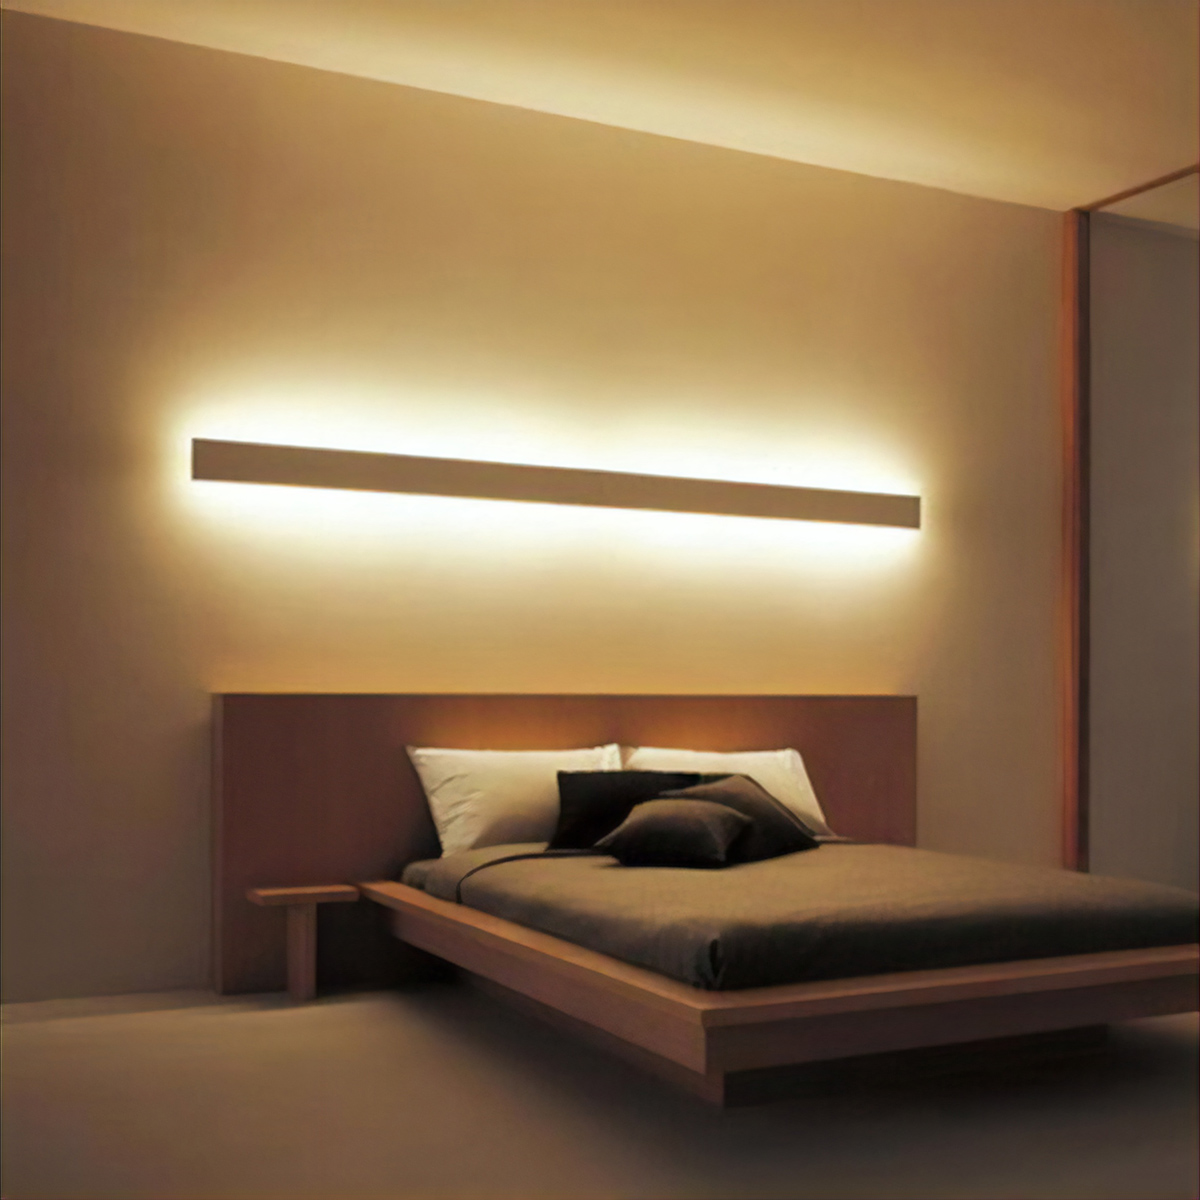 Eleni Lighting EL702 Curved LED Linear Profile Cornice - Next Day Delivery| Image:12